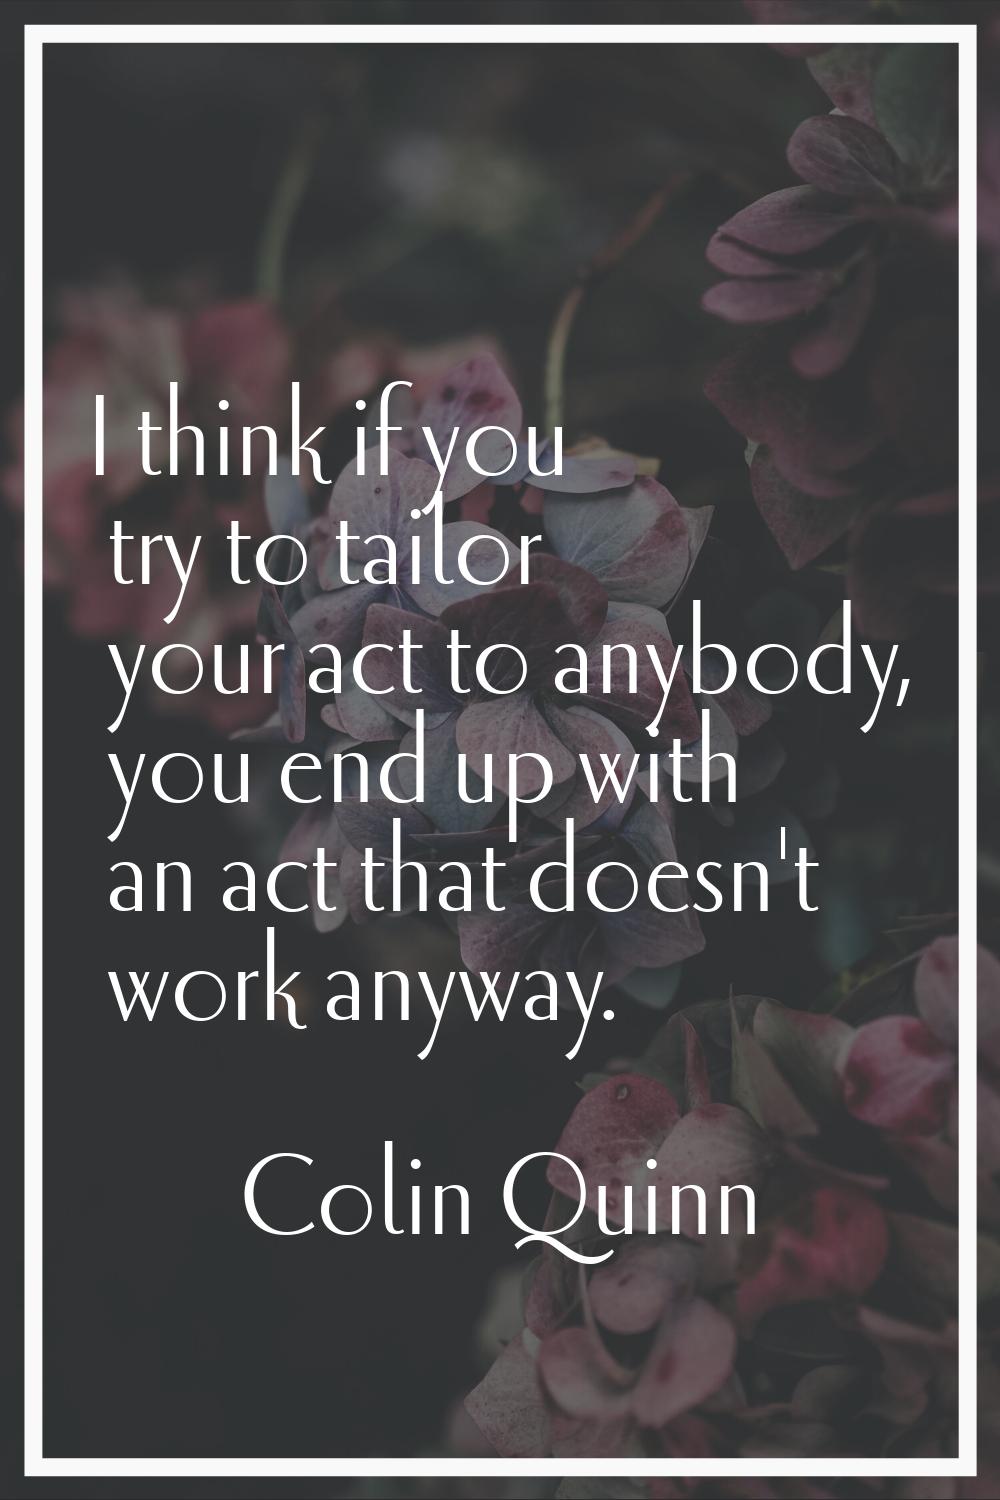 I think if you try to tailor your act to anybody, you end up with an act that doesn't work anyway.